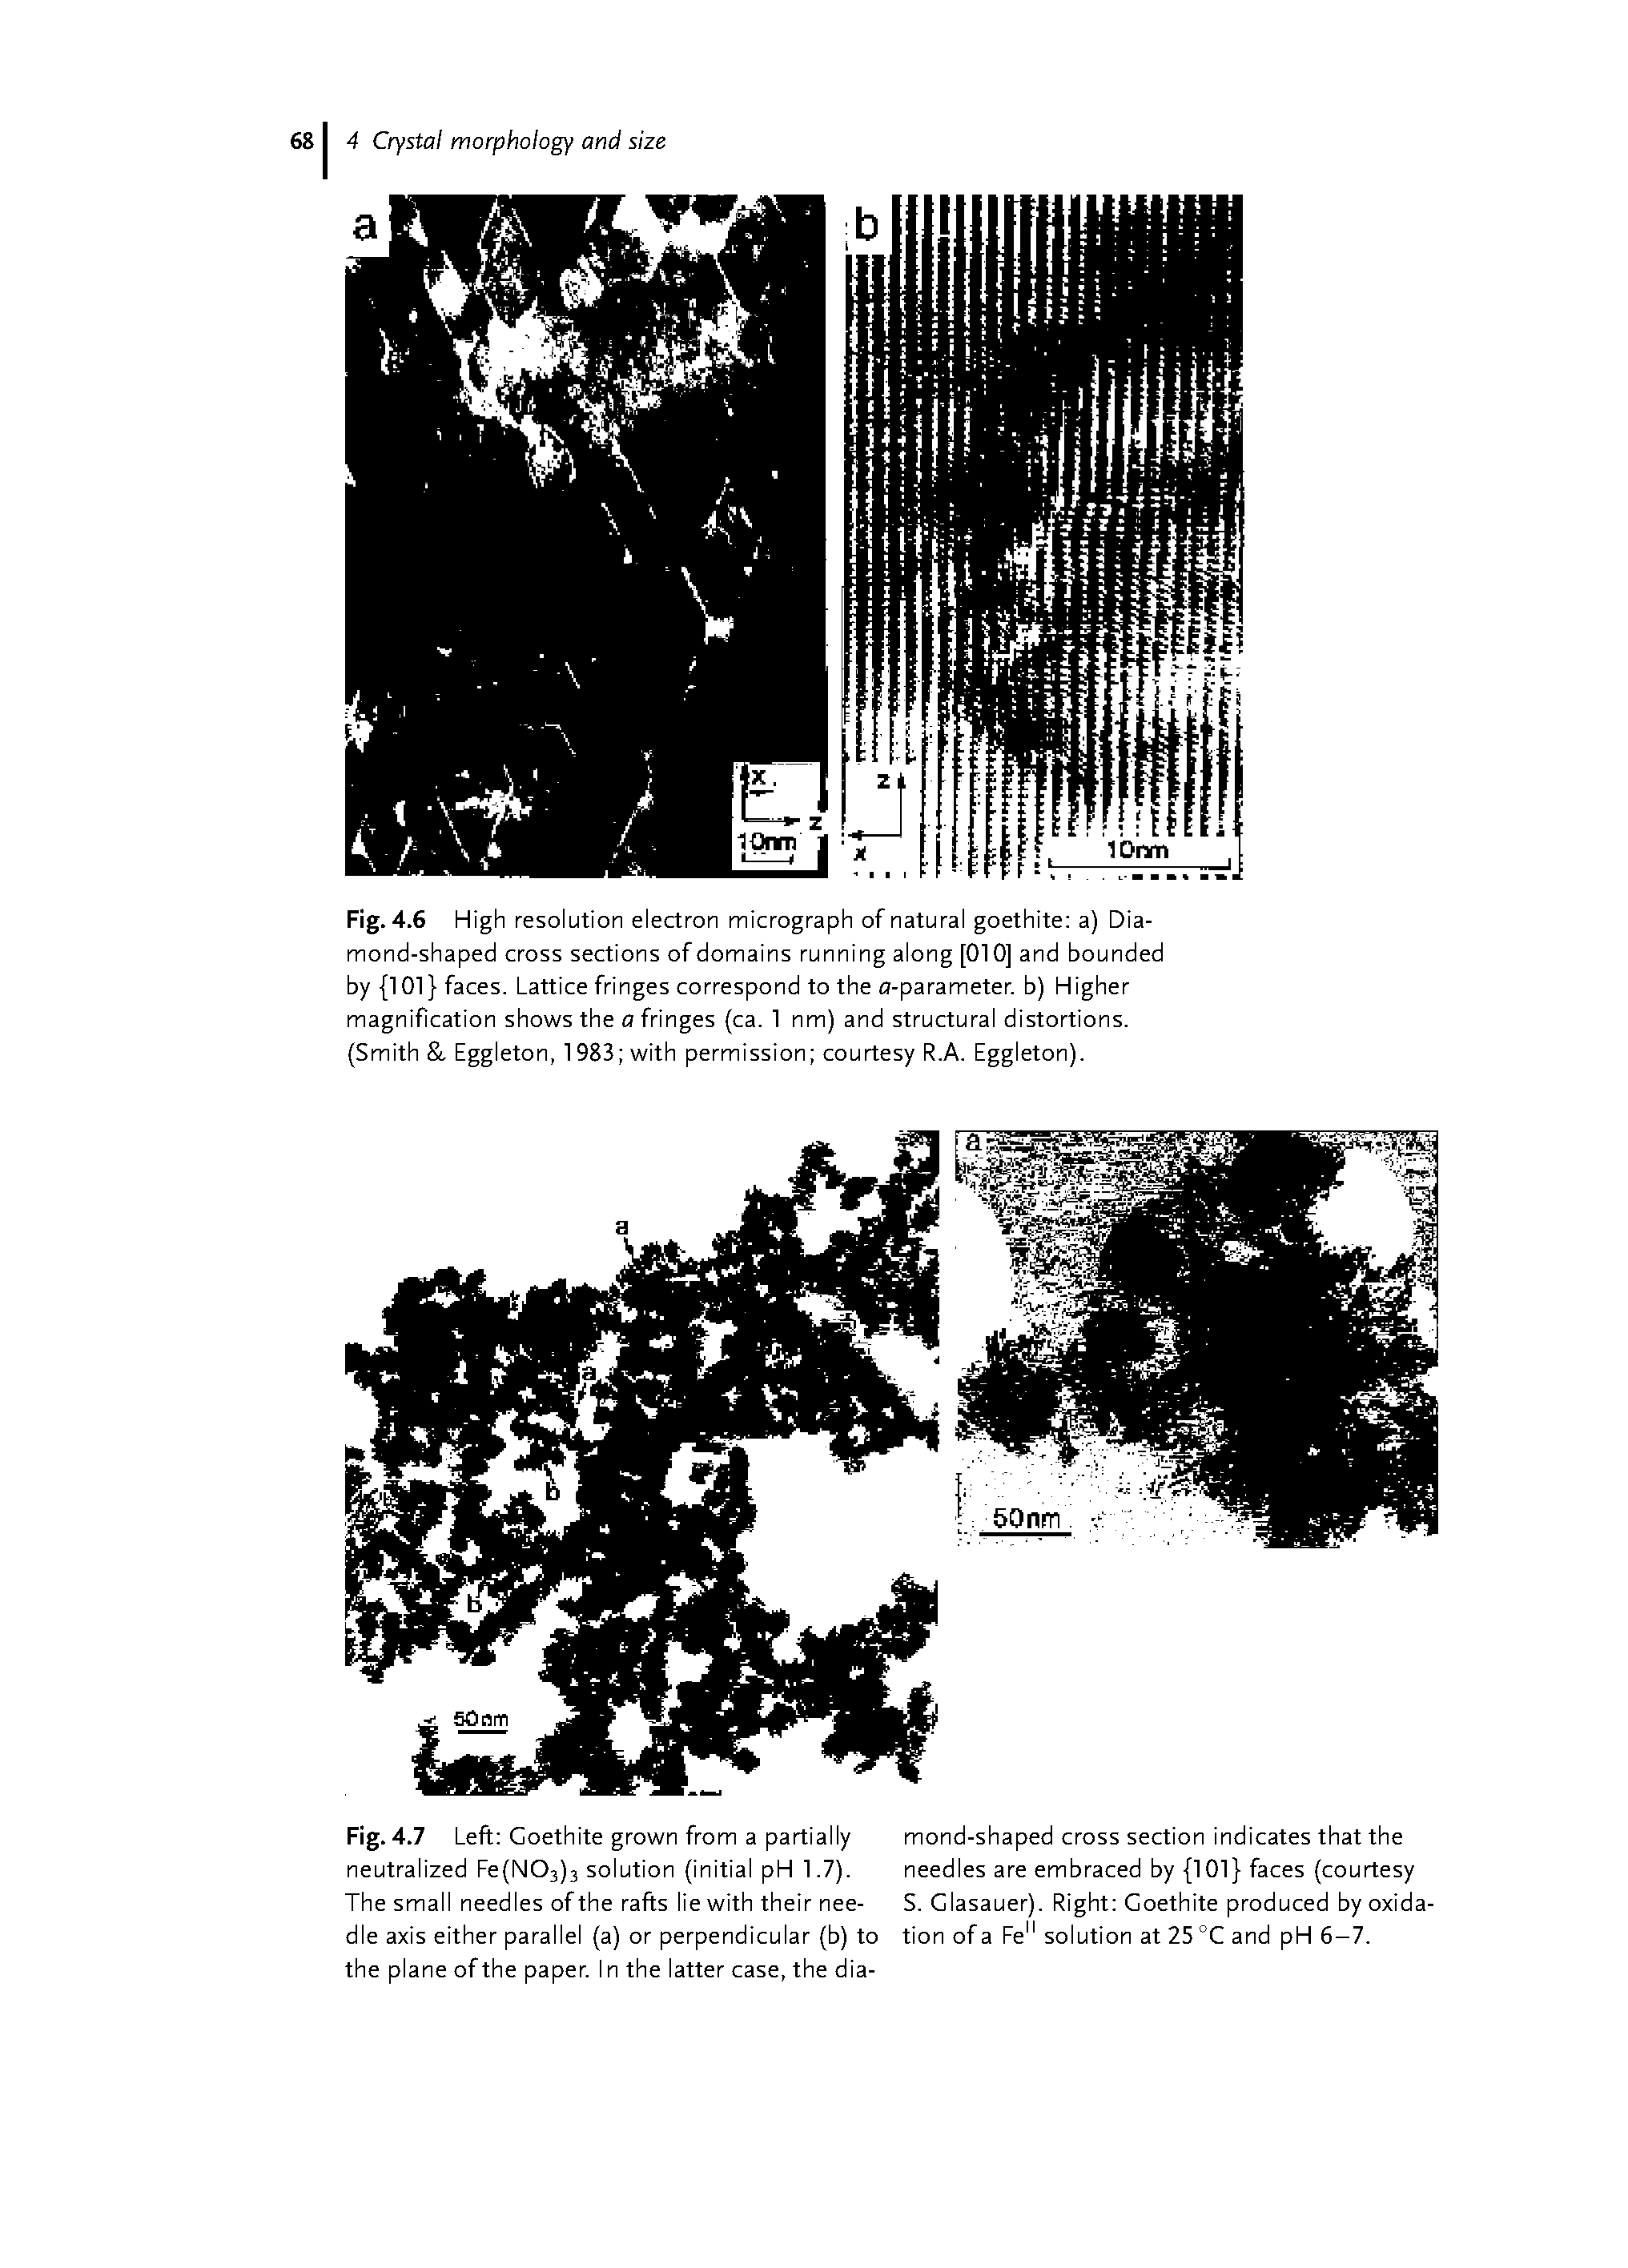 Fig. 4.6 High resolution electron micrograph of natural goethite a) Diamond-shaped cross sections of domains running along [010] and bounded by 101 faces. Lattice fringes correspond to the c -parameter. b) Higher magnification shows the a fringes (ca. 1 nm) and structural distortions. (Smith Eggleton, 1983 with permission courtesy R.A. Eggleton).